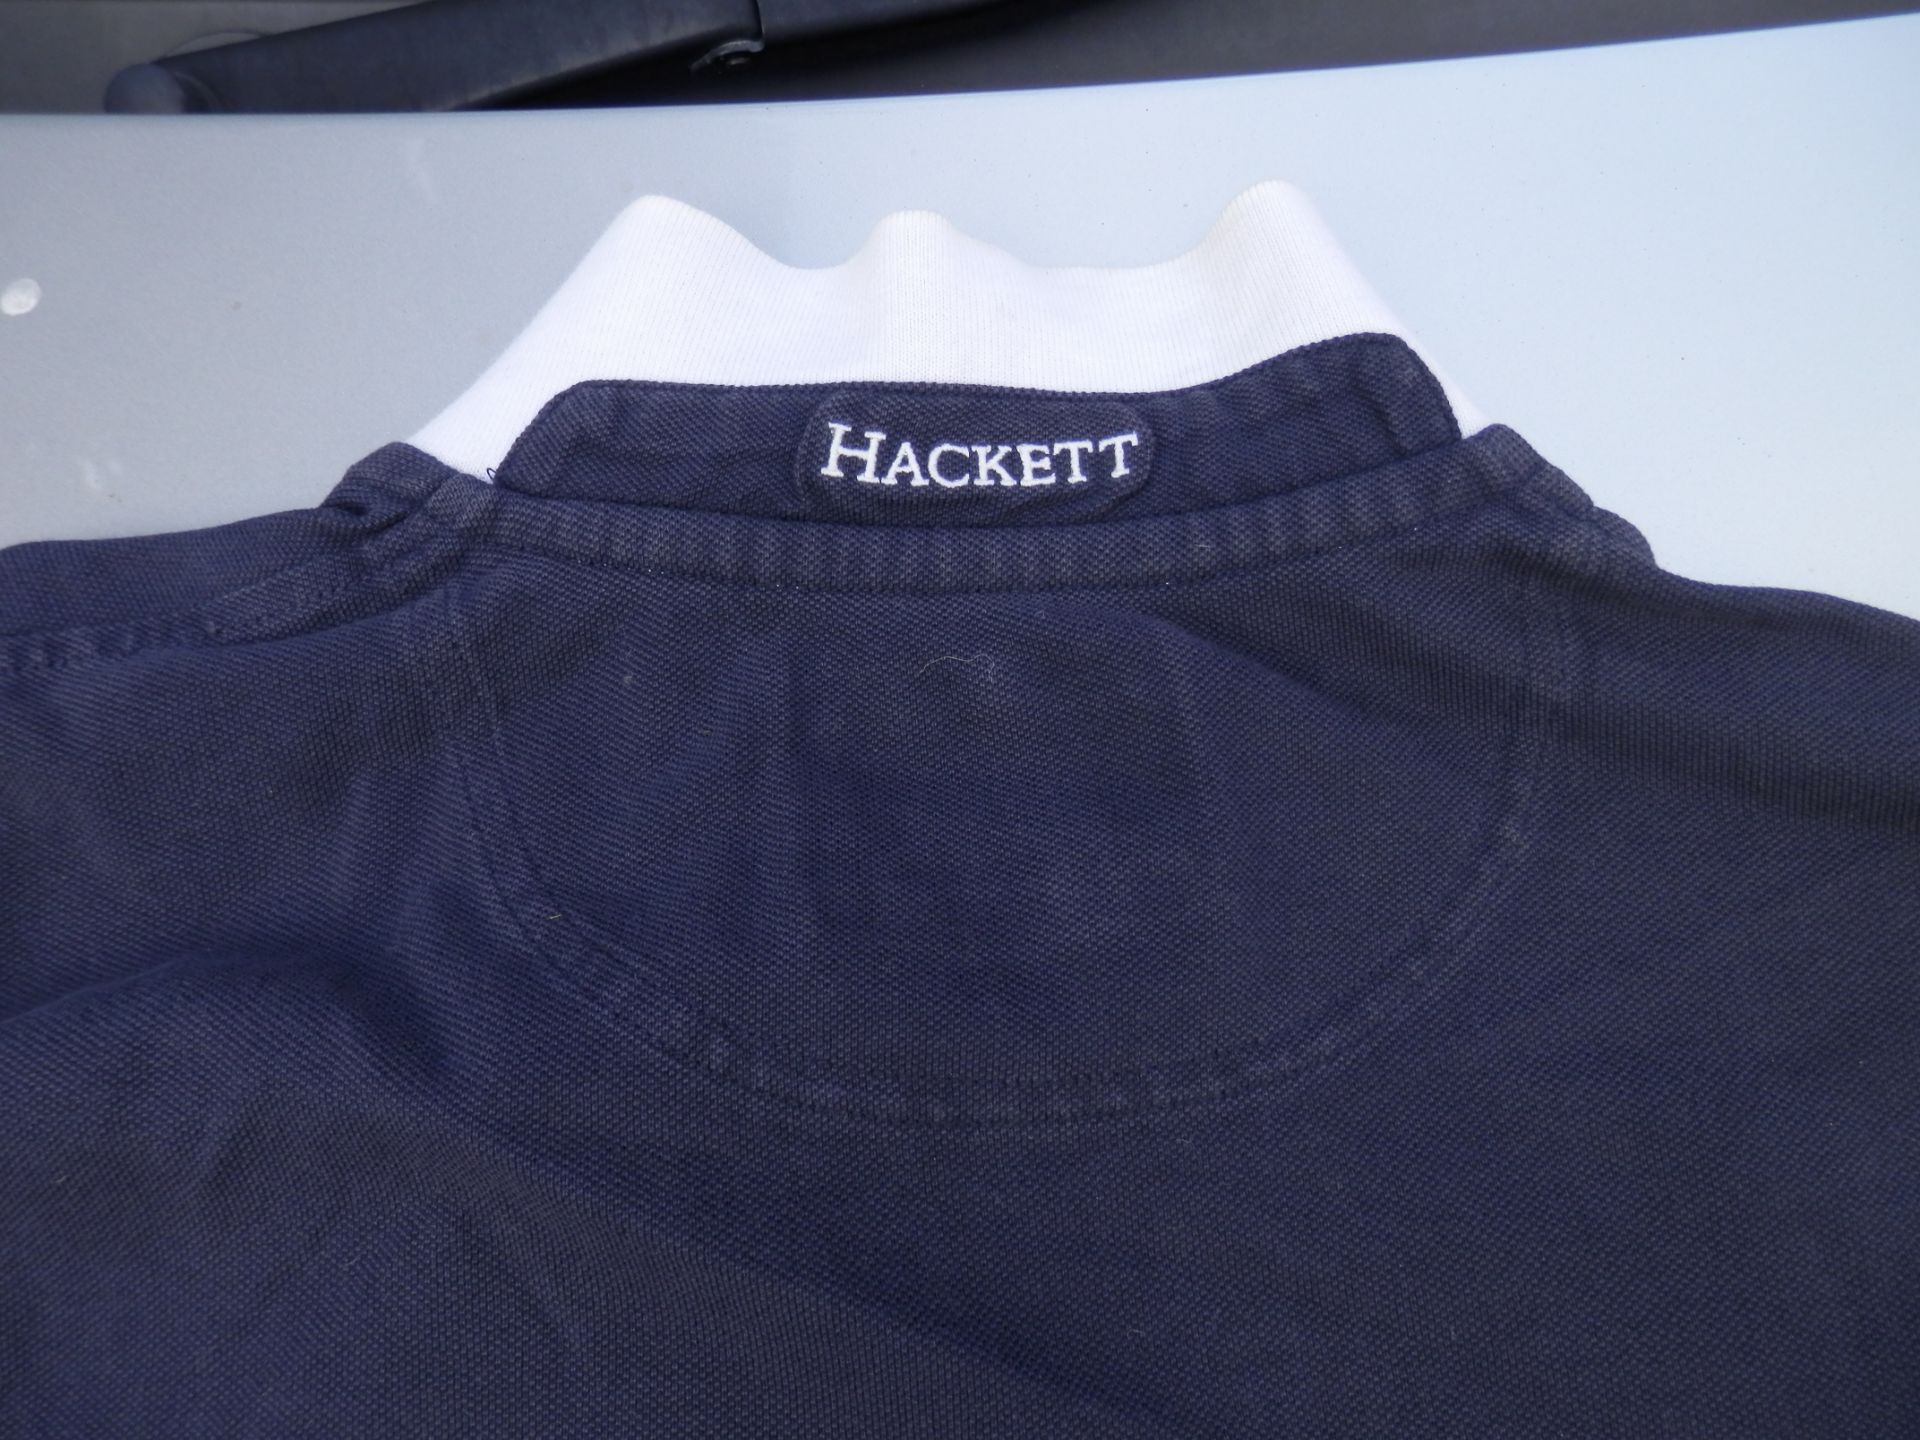 GENTS USED HACKETT POLO SHIRT IN XL, BLUE & WHITE, NO1. USED CONDITION. - Image 5 of 6